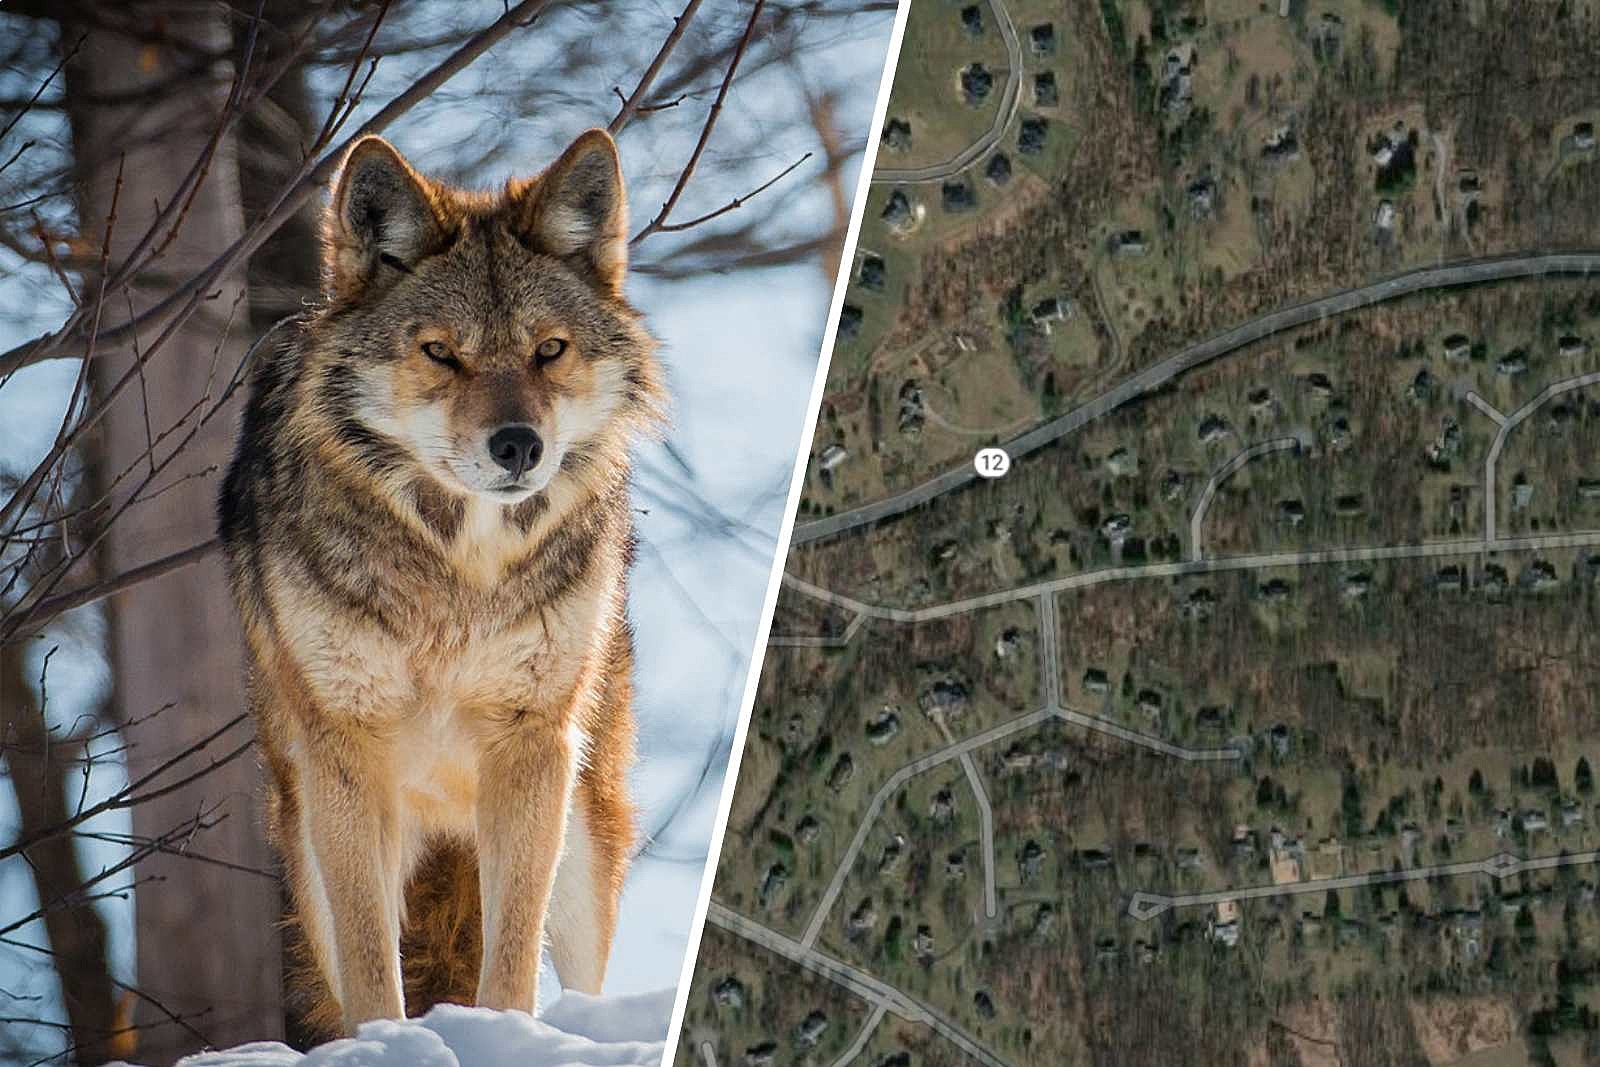 After another N.J. coyote attack, here's what to do if one approaches you 